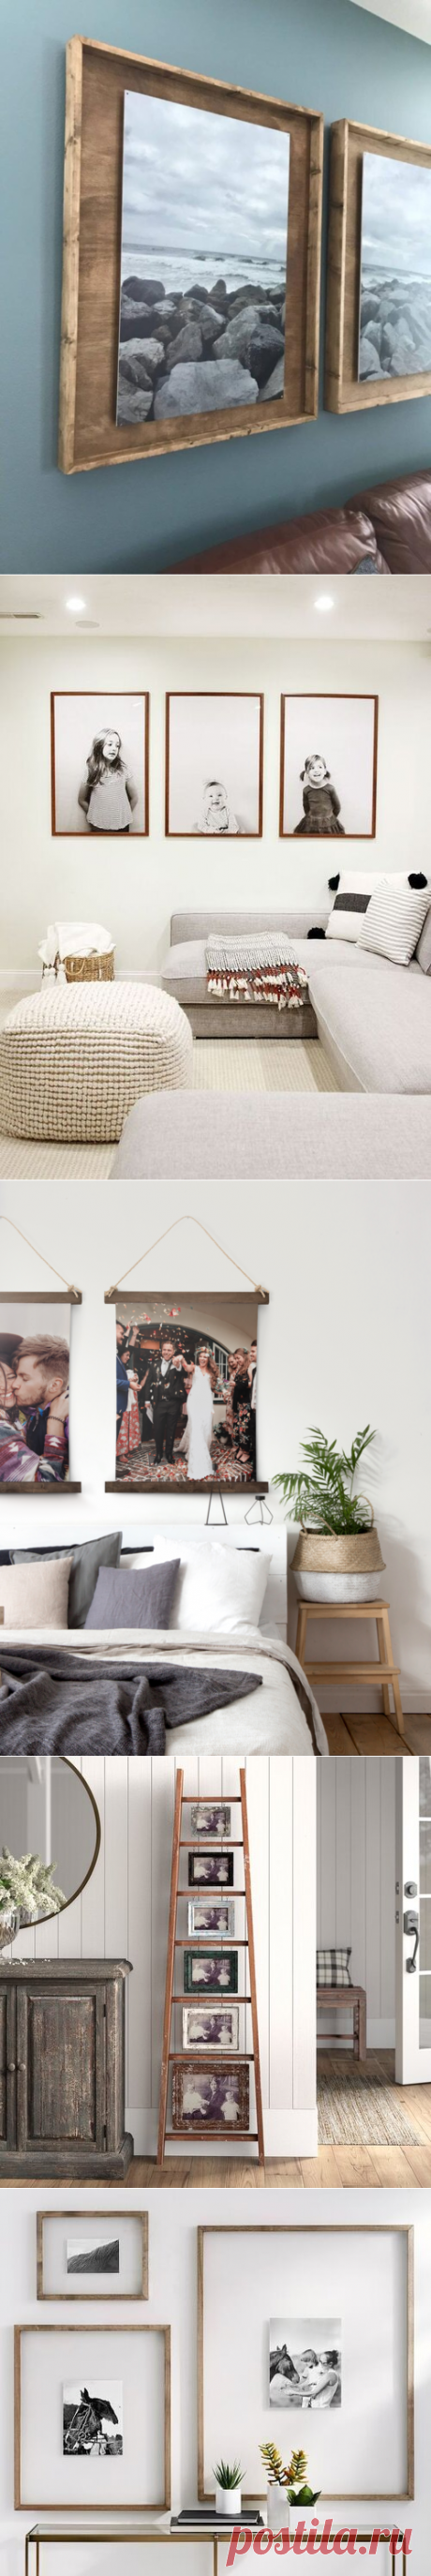 Unique Ways To Display Your Photos In Your Home :: Southeast Nebraska Family Photographer - dirtroadphotography.com